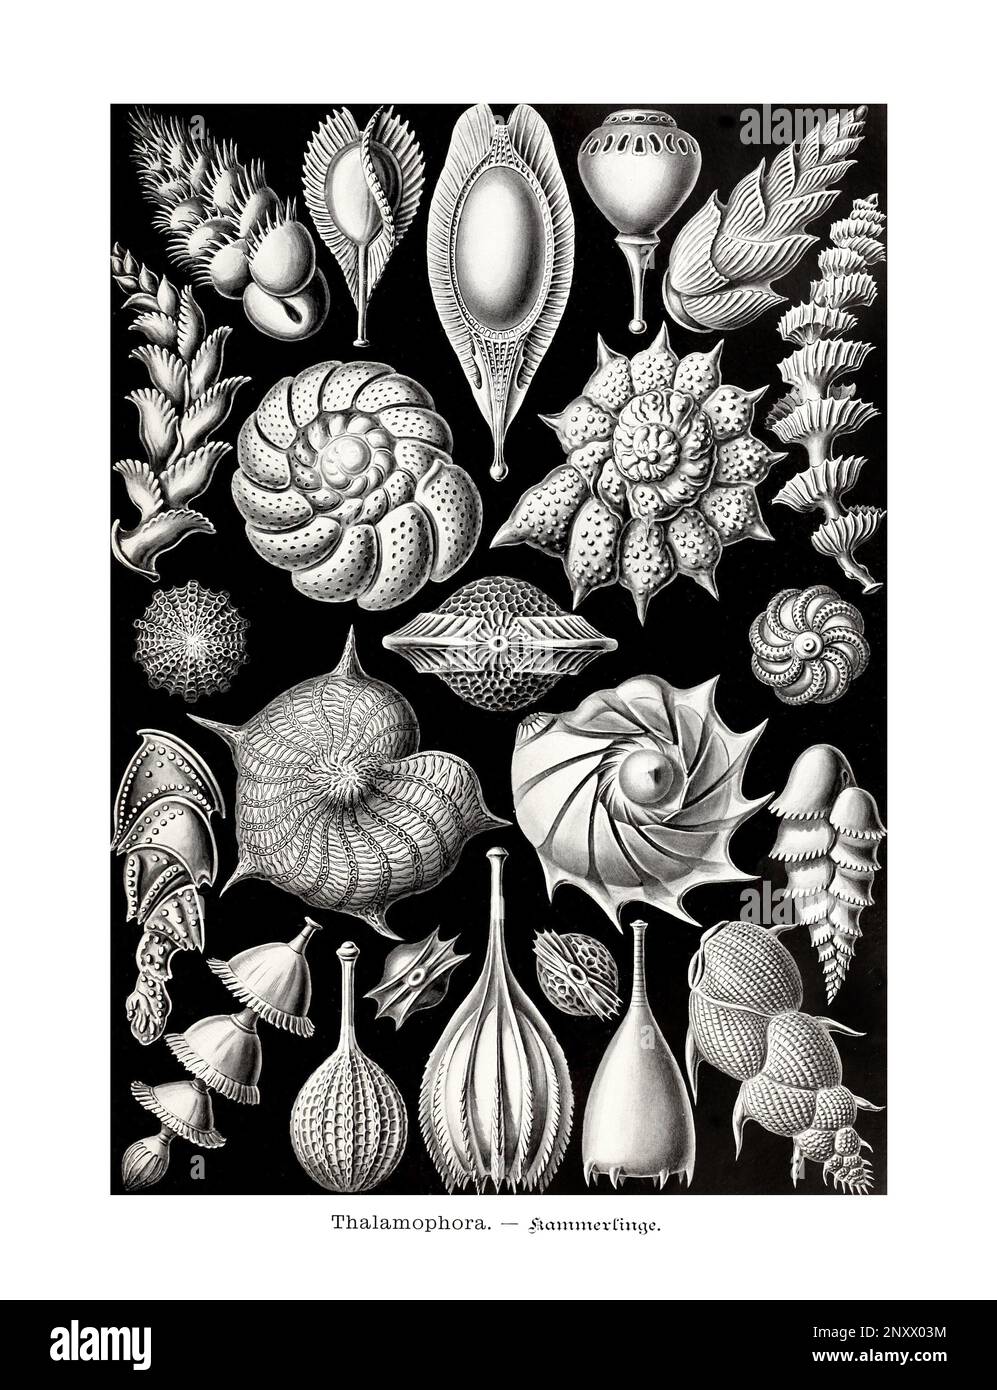 ERNST HAECKEL ART -  Thalamophora or forams - 19th Century - Antique Zoological illustration - Illustrations of the book : “Art Forms in Nature” Stock Photo